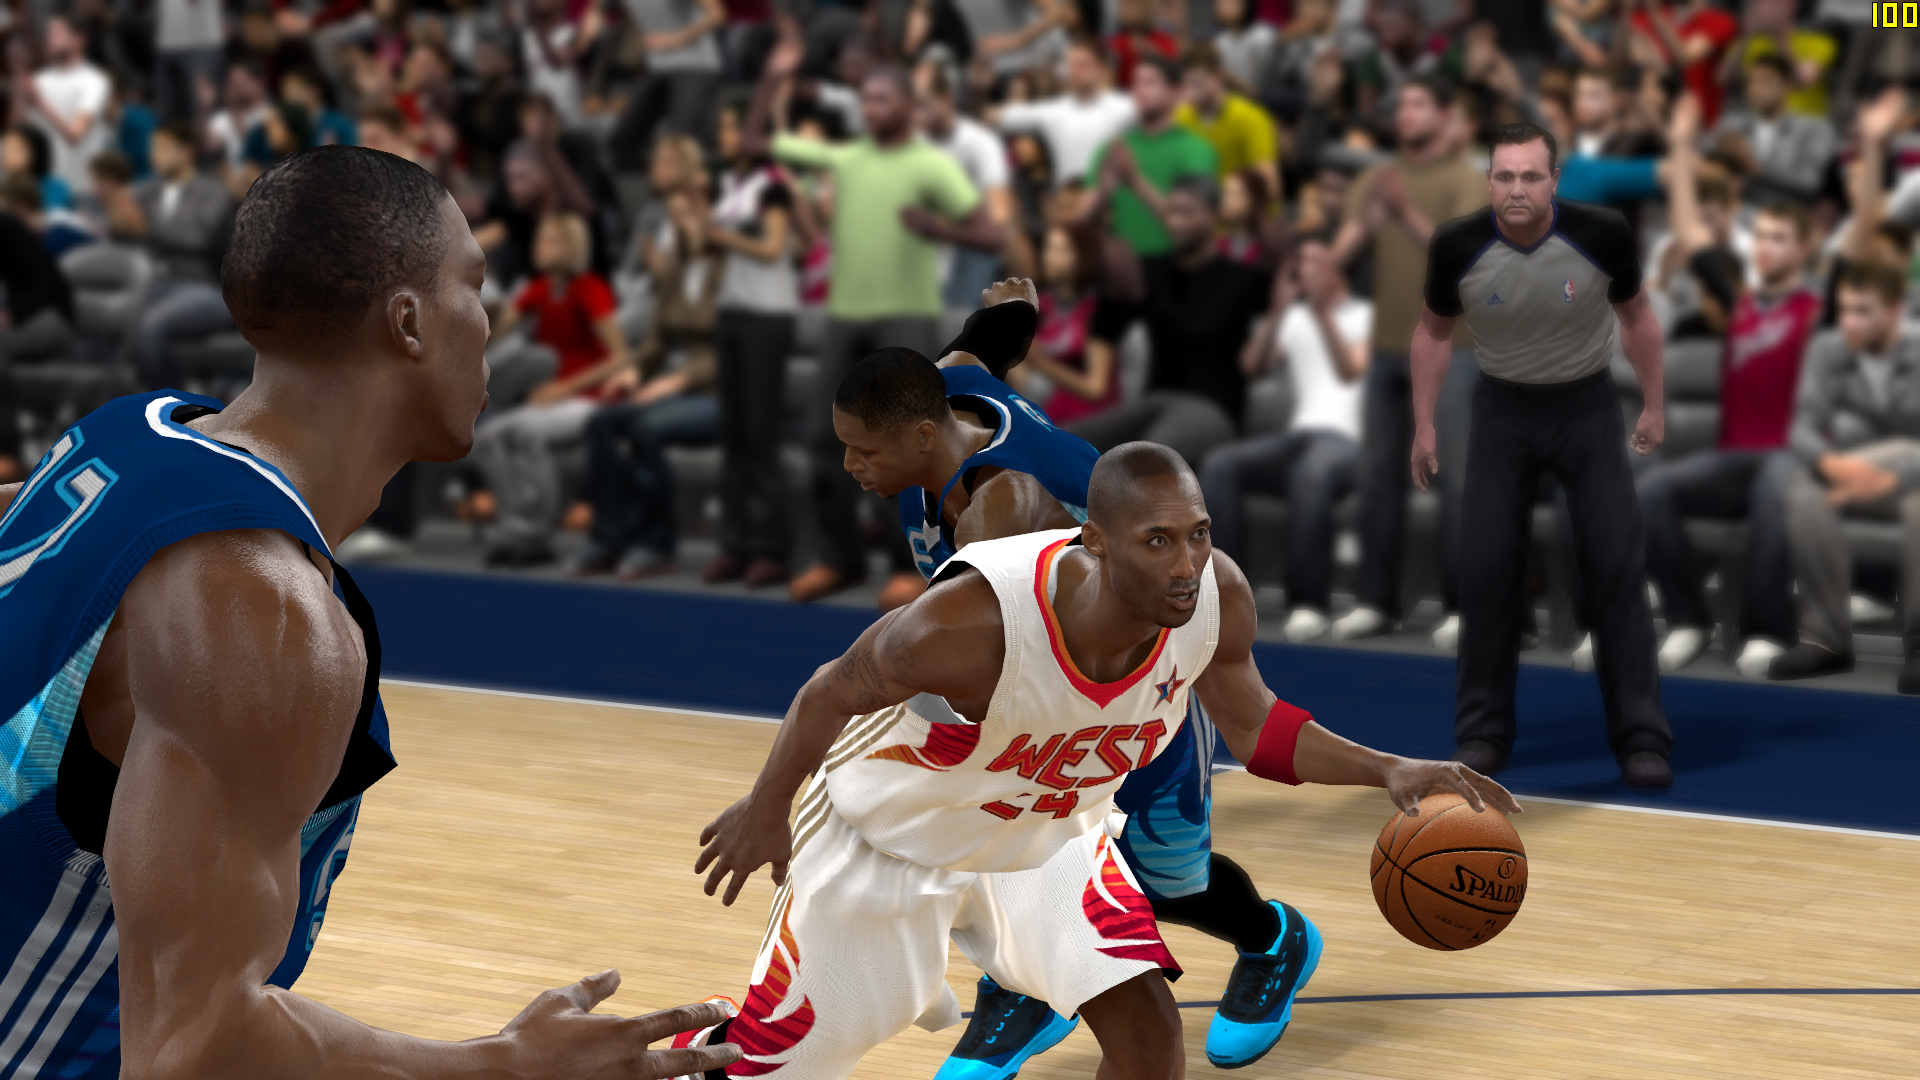 There are far more images available for NBA 2K10, but these are the ones we...